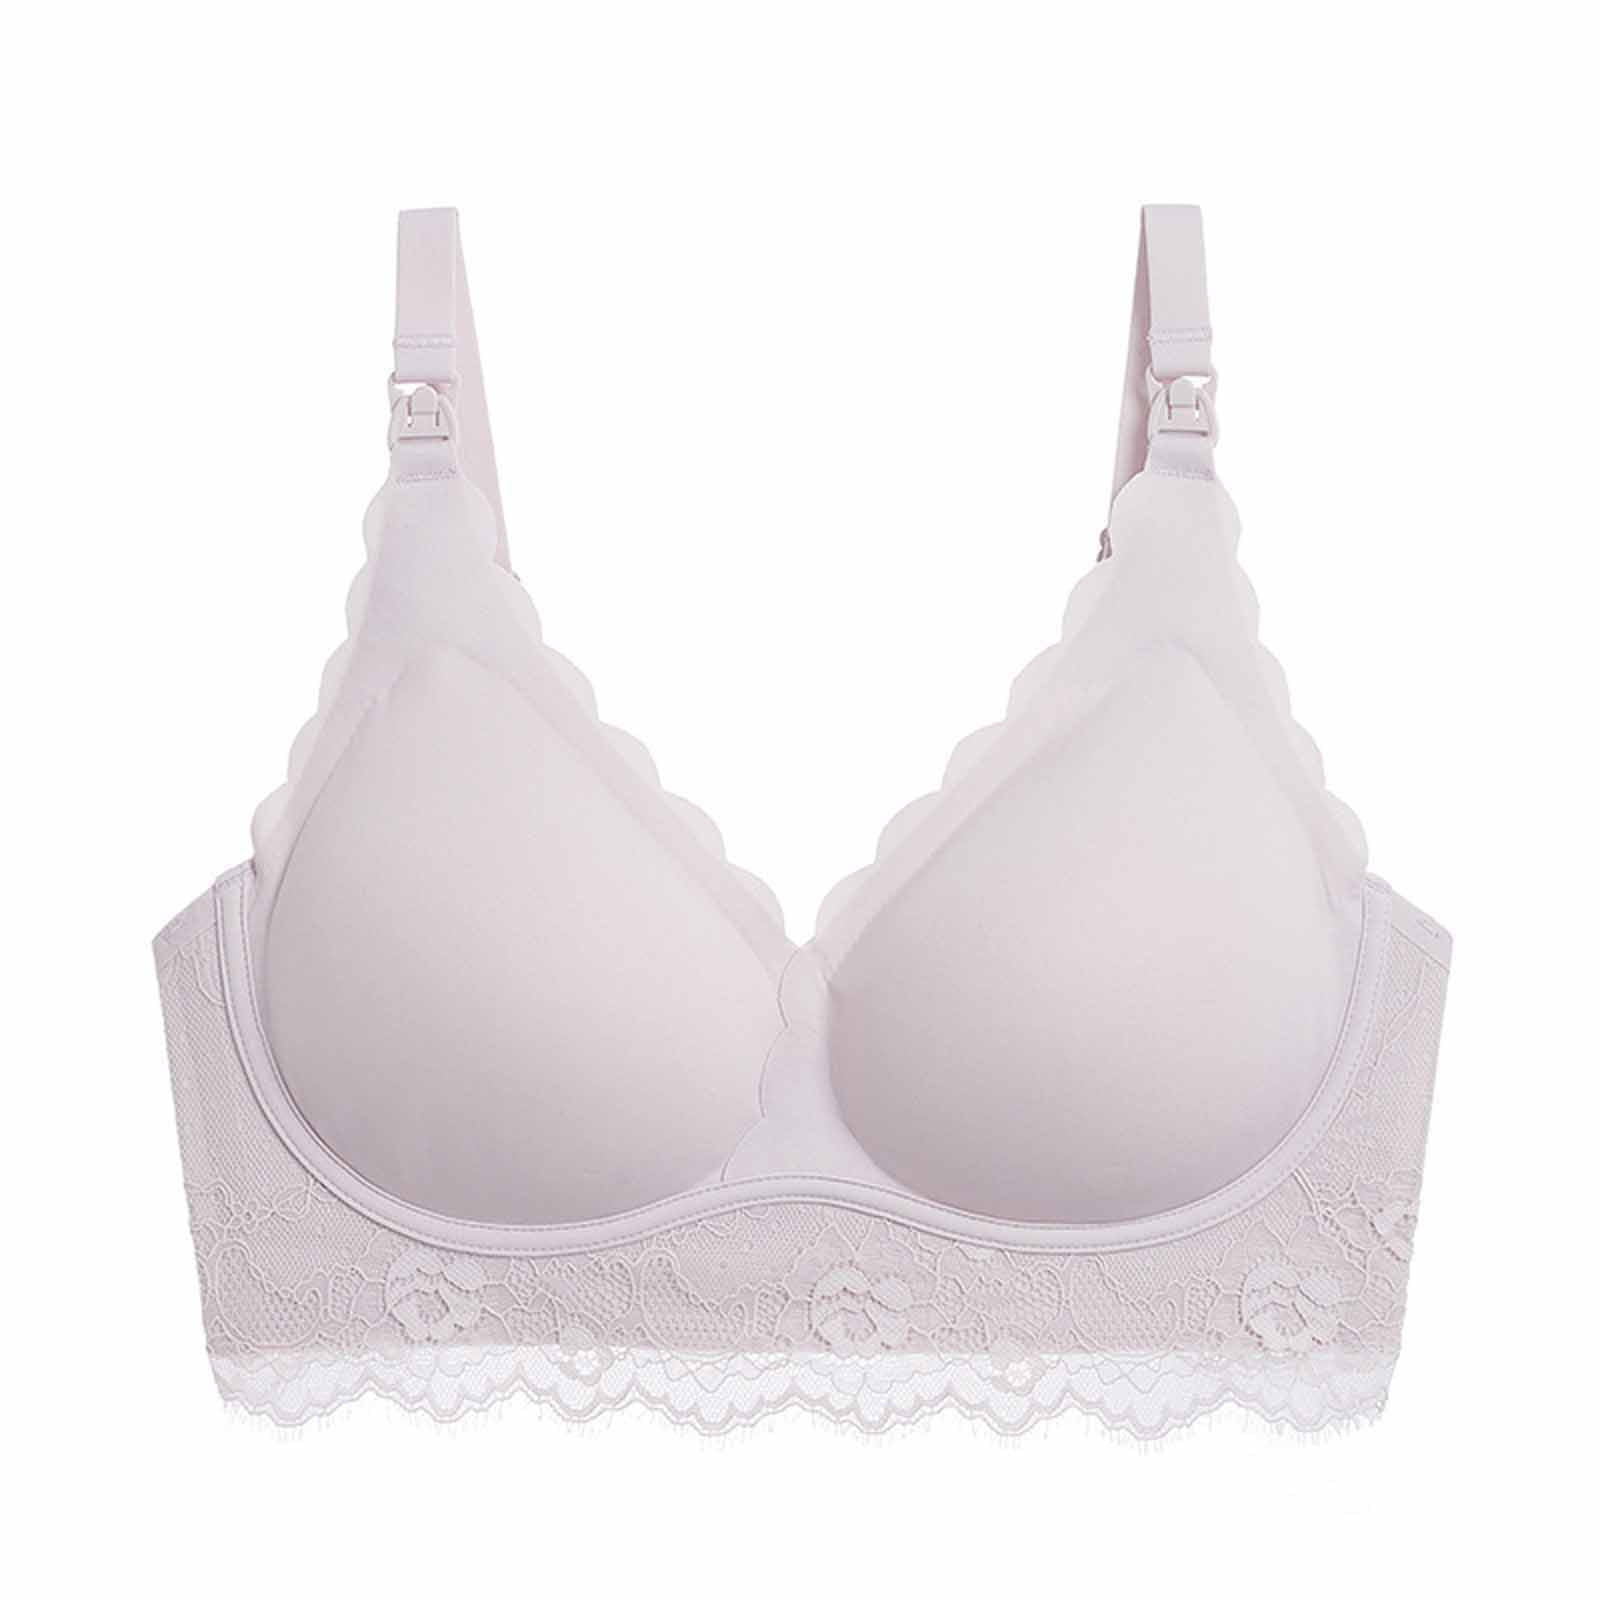  B80 Bra, Wirefree Bra, Cotton Large Size, Thin Cup, Beige,  Summer Bra, Breathable, Thin and Light Bra, Correction Bra, Comfortable to  Wear, Cleavage Bra, Sexy Lace Bra, Black, 3 Columns, 5